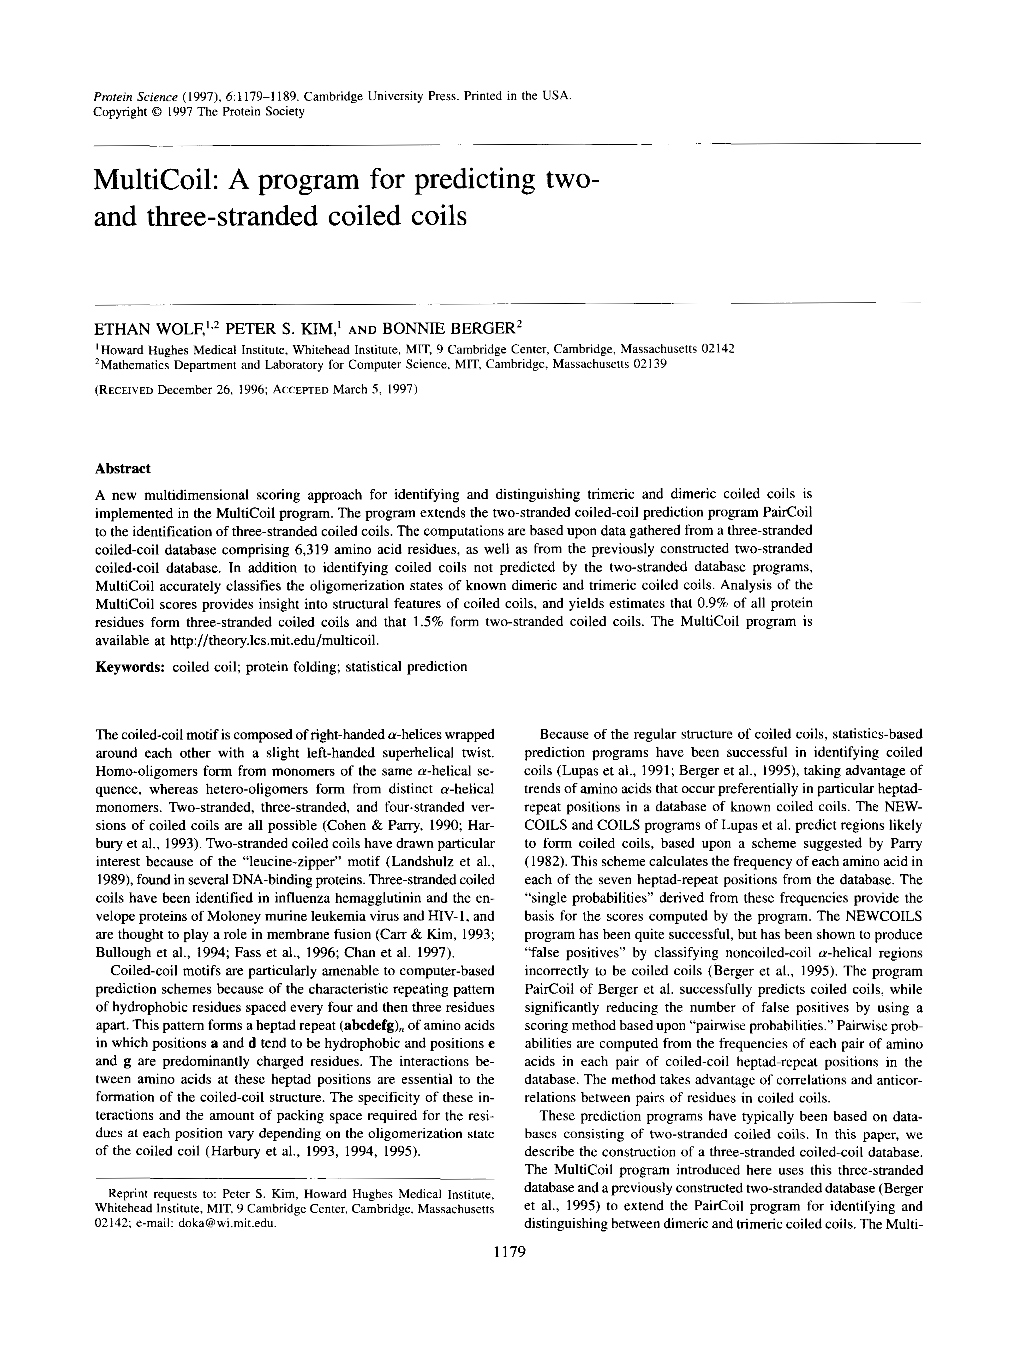 Multicoil: a Program for Predicting Two-And Three-Stranded Coiled Coils